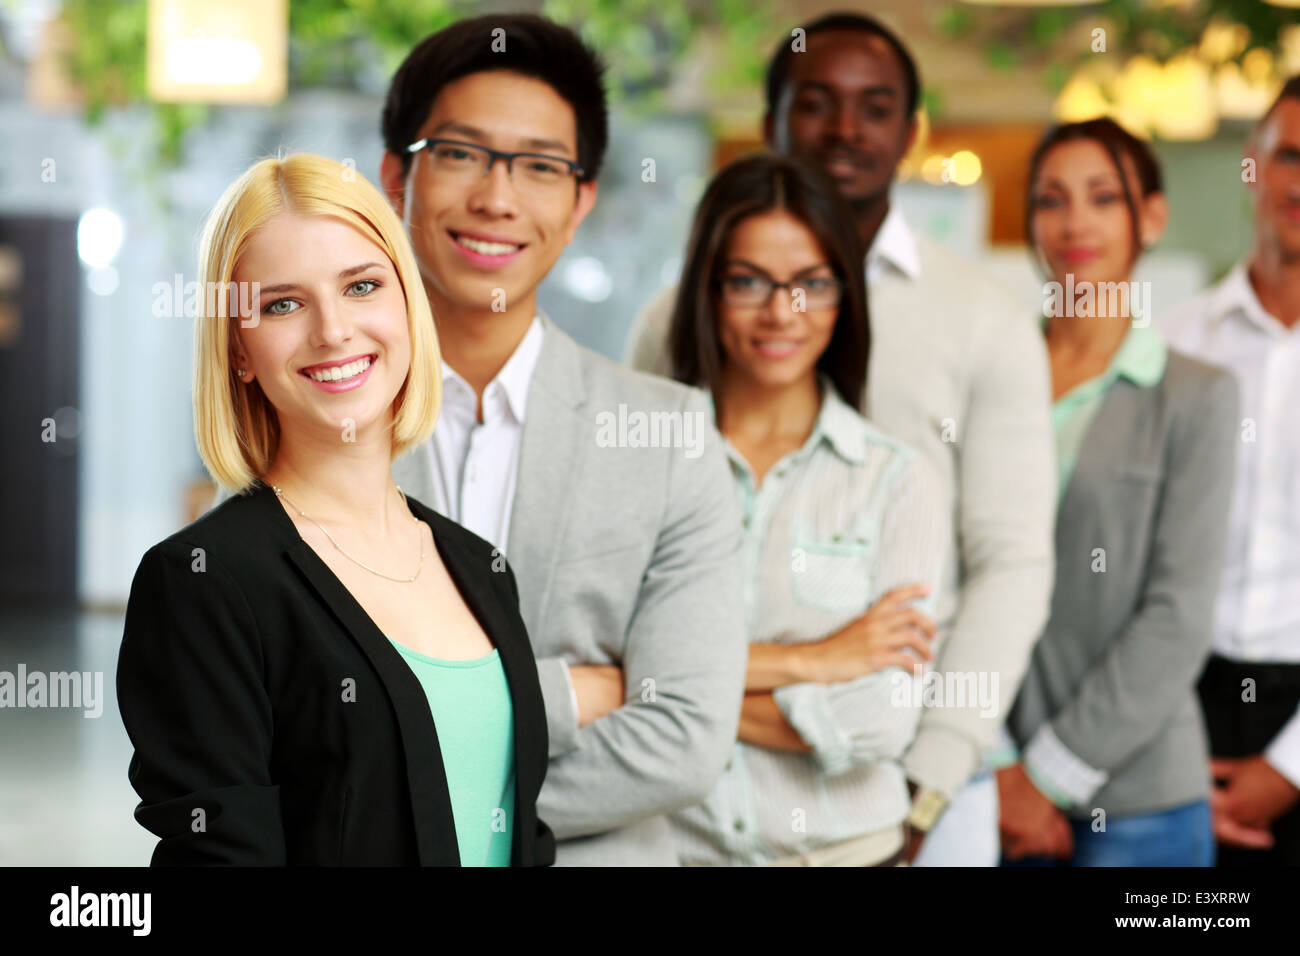 Portrait of a smiling businesswoman standing in front of colleagues Stock Photo